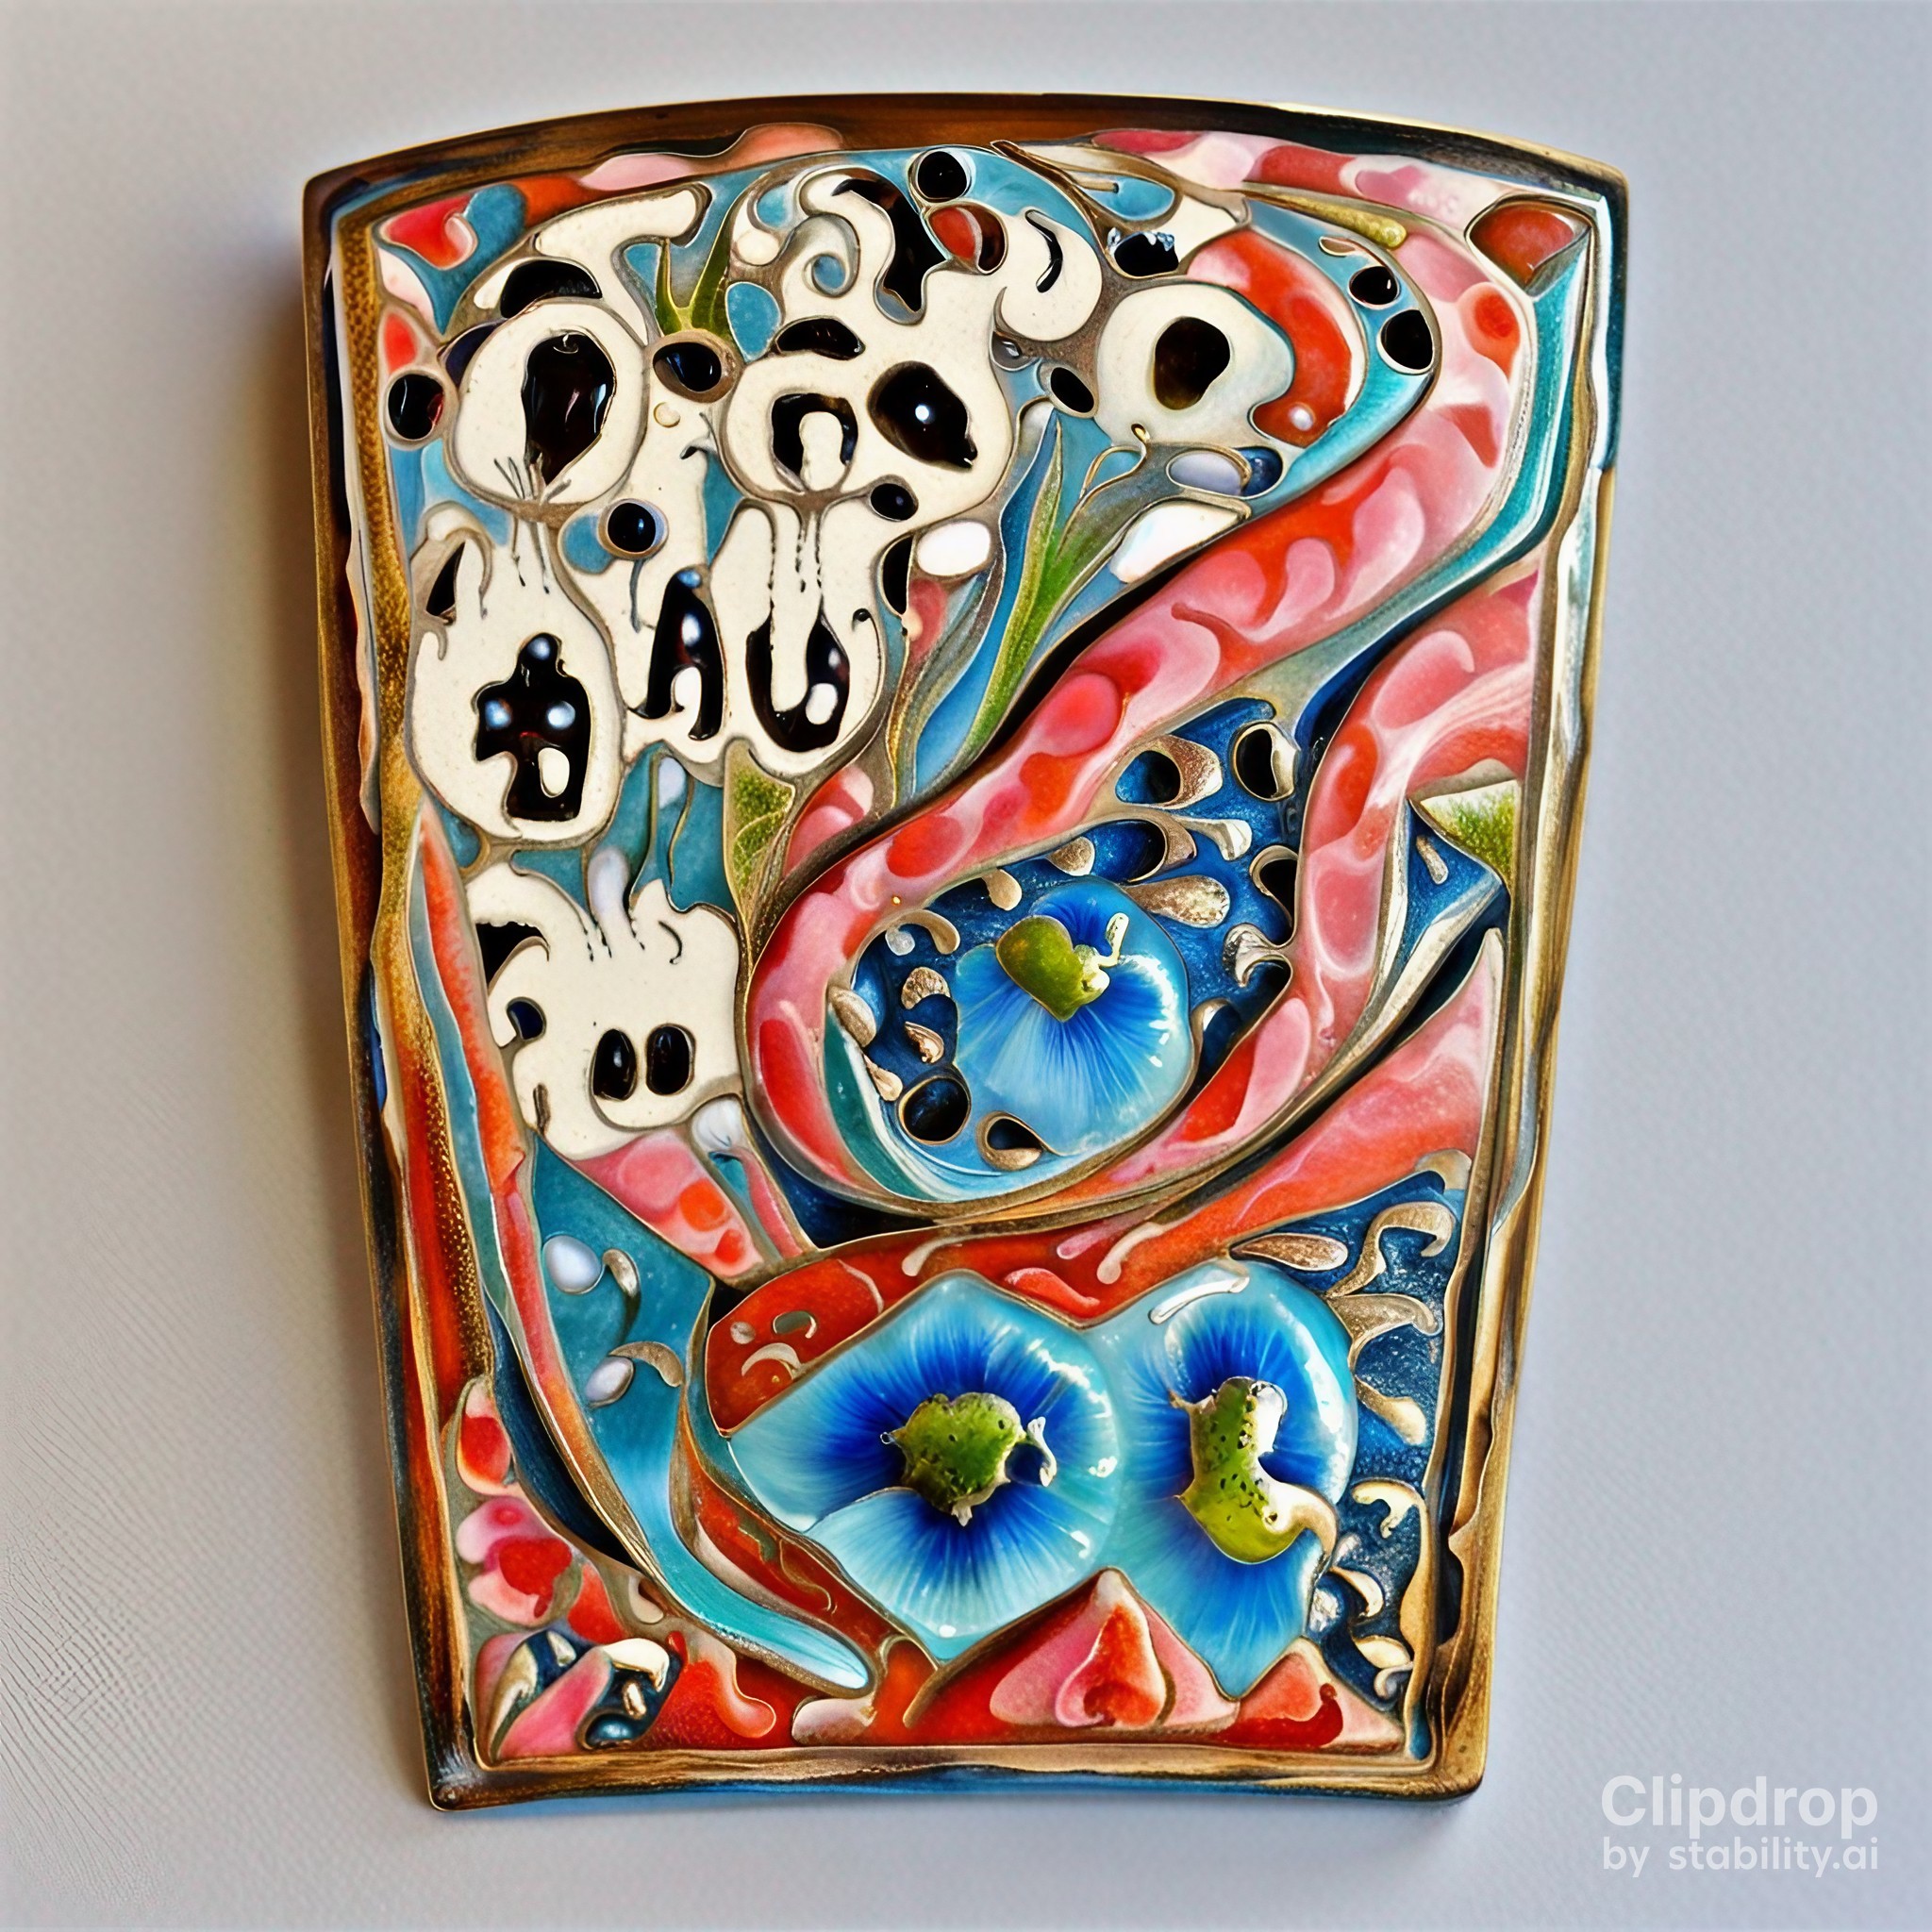 Mastering Enamel Work: Tips and Tricks for Creating Stunning Enamel Jewelry